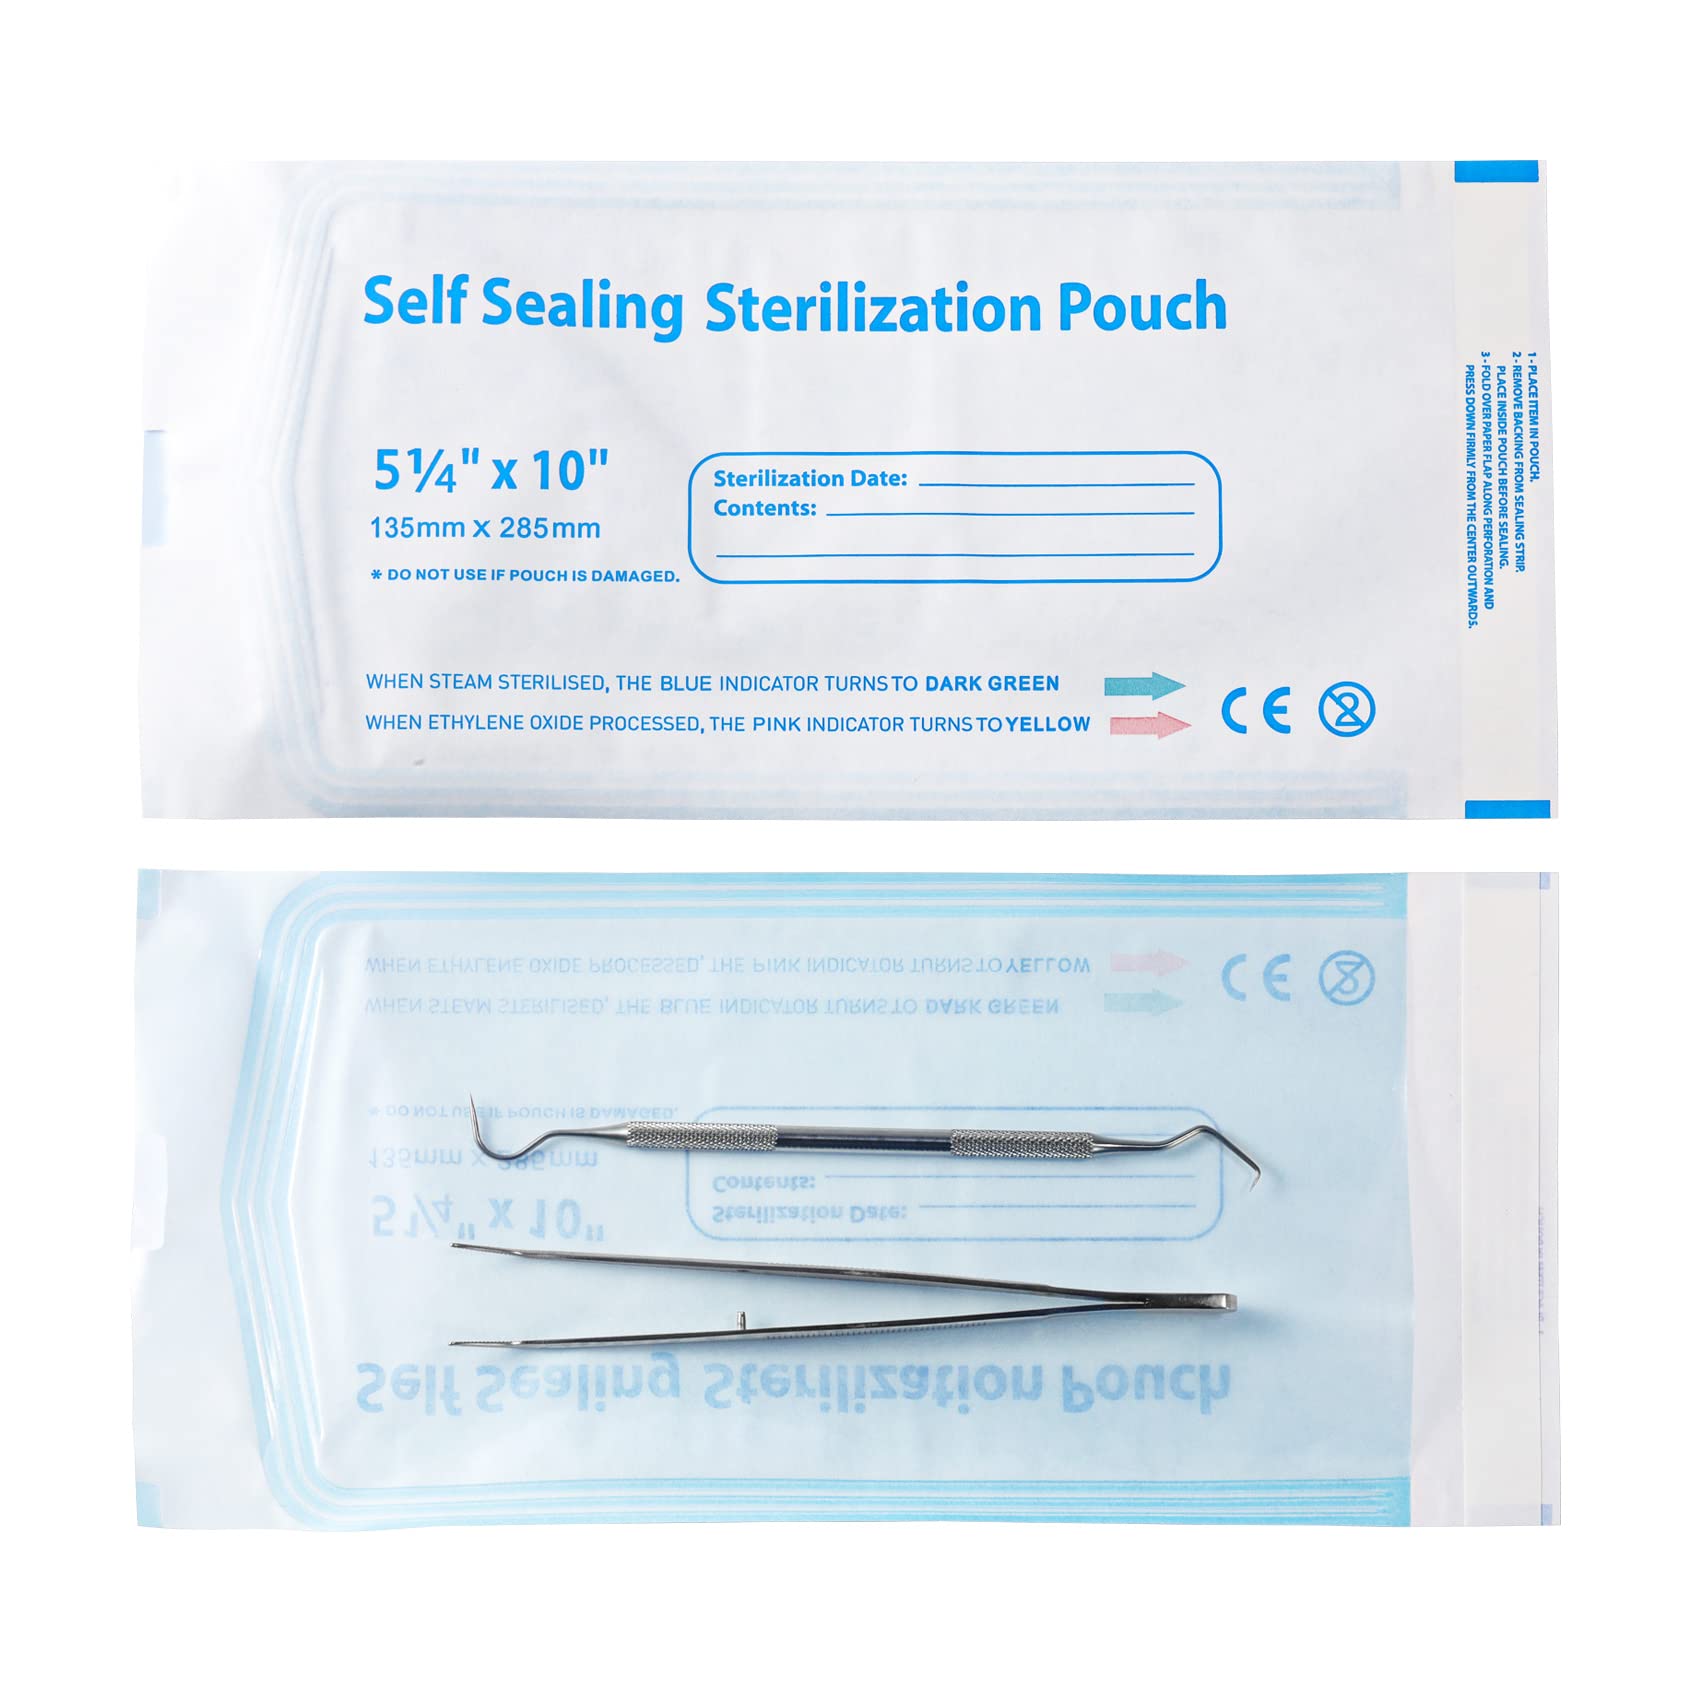 Optimizing Sterilization Practices with Self-Sealing Sterilization Pouches: A Comprehensive Guide